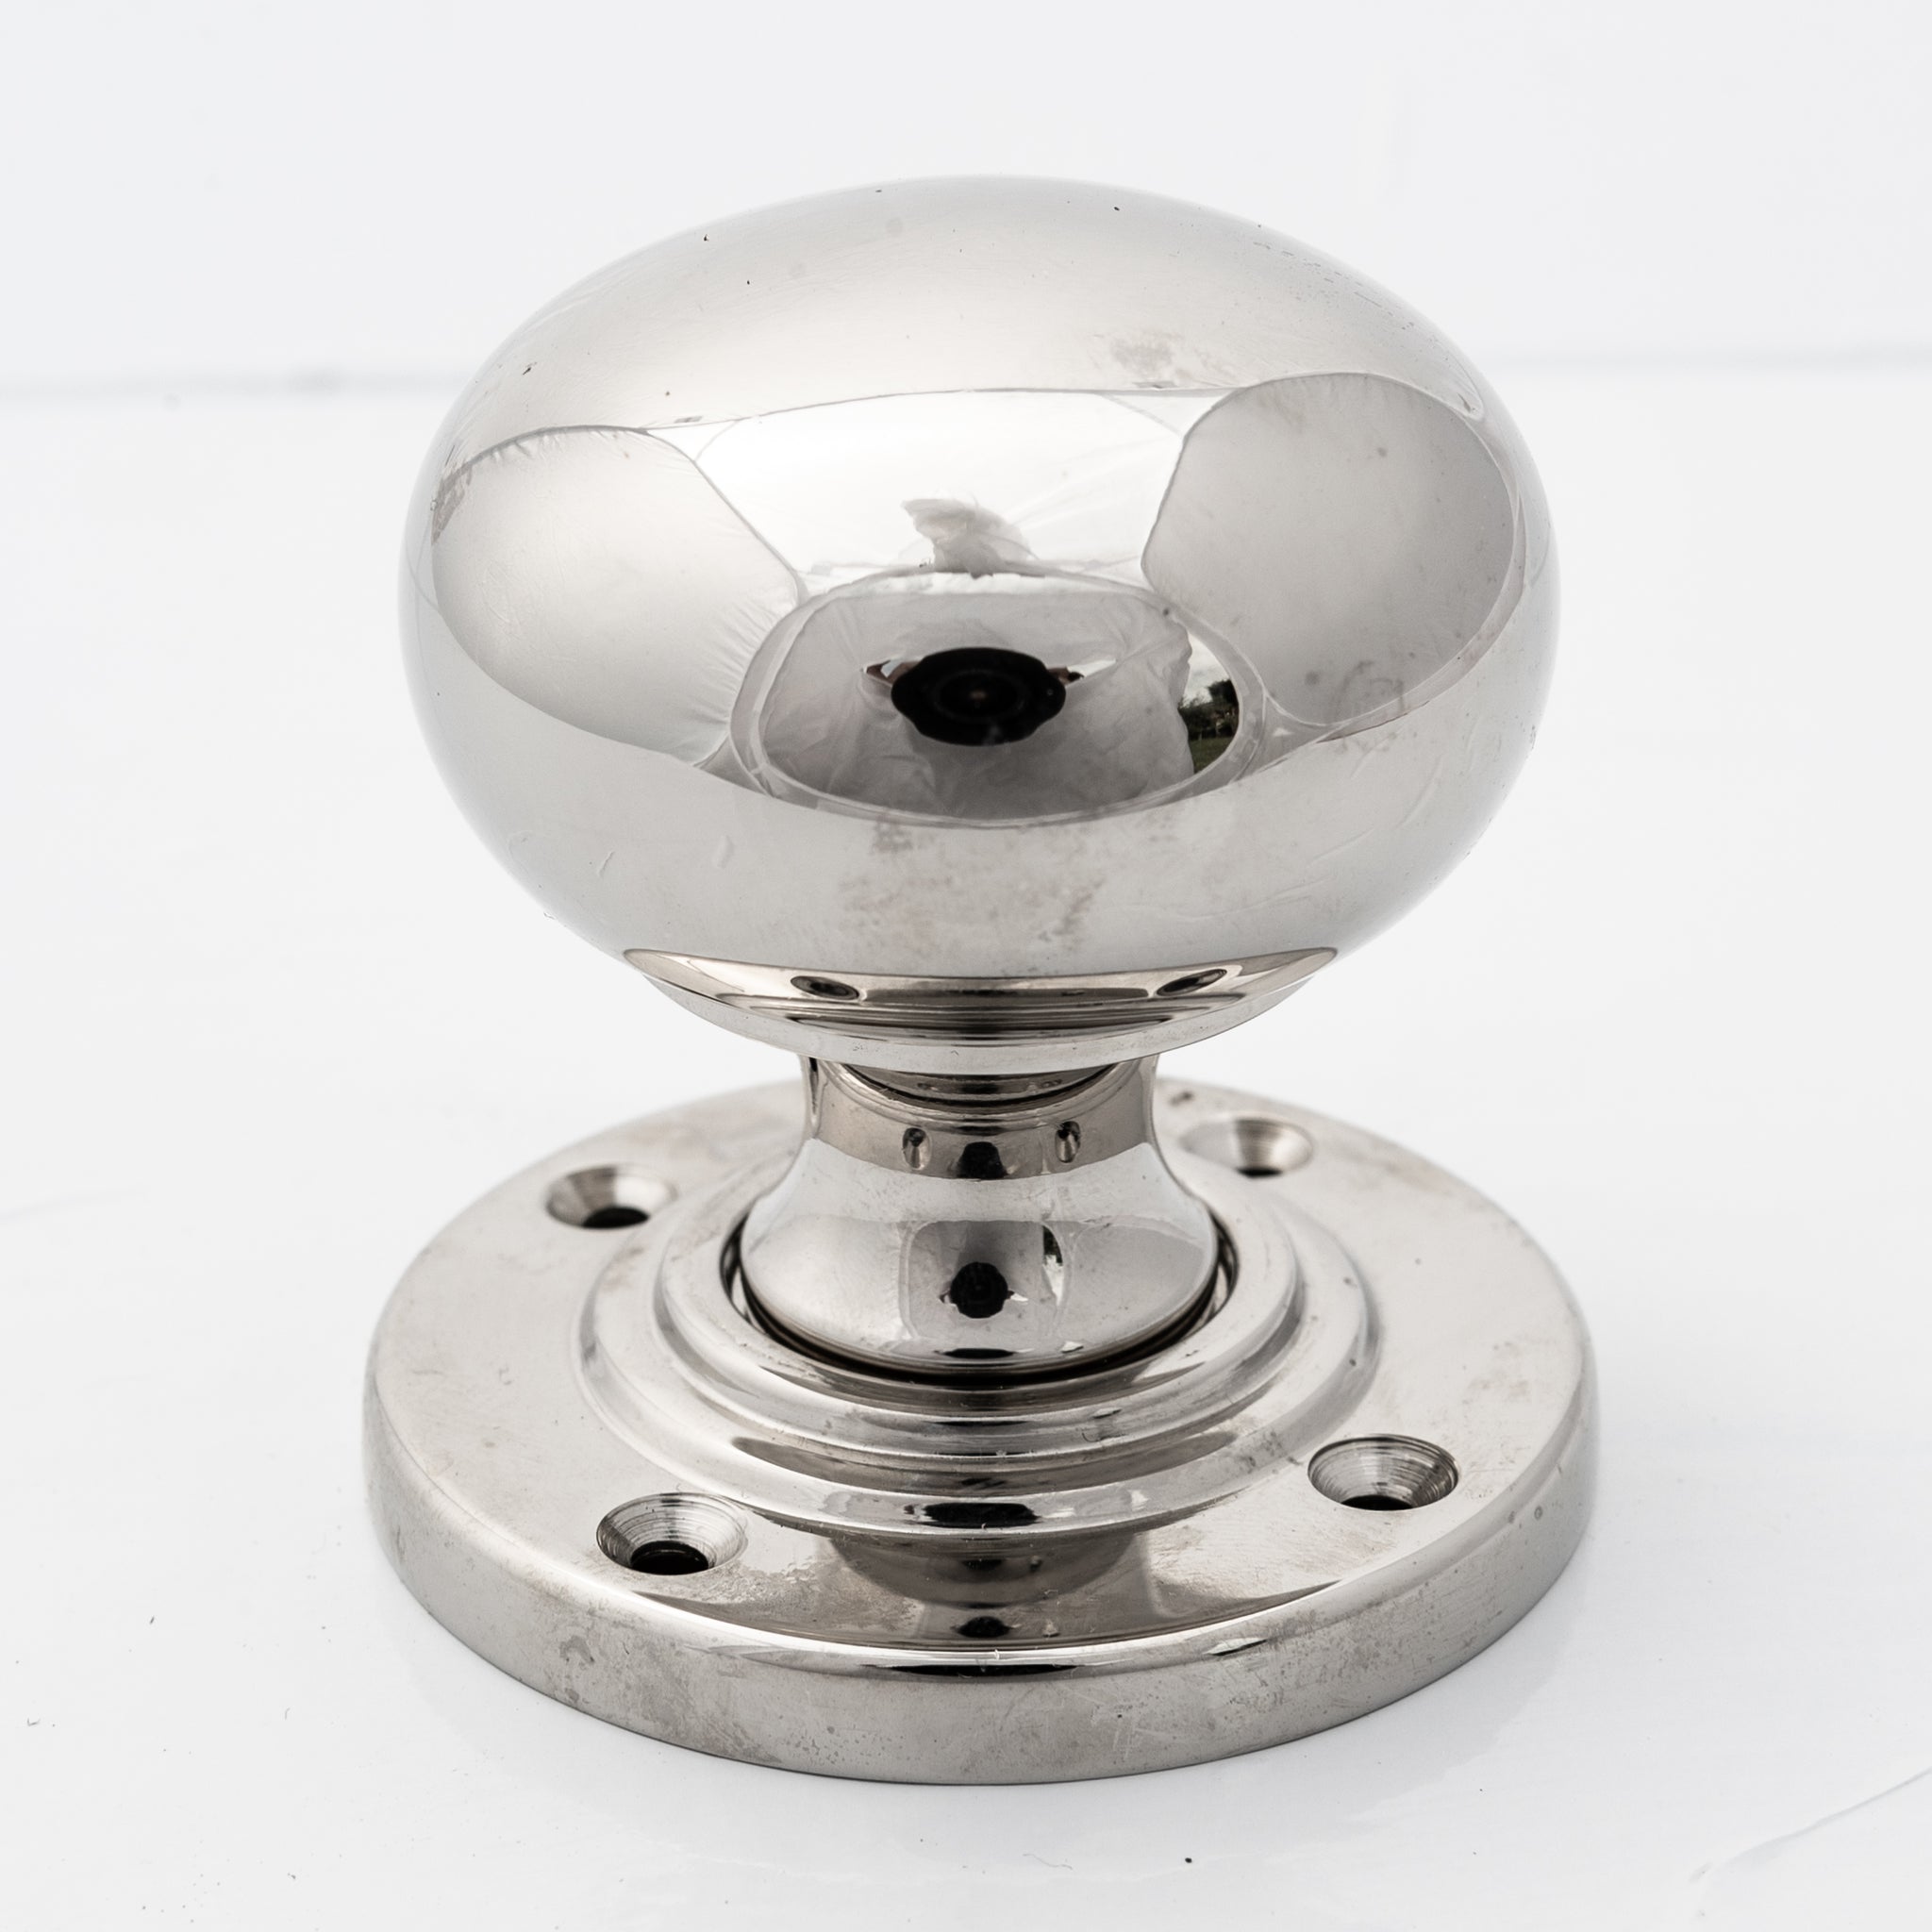 Reclaimed Polished Chrome Door Knob 3 Available - The Architectural Forum